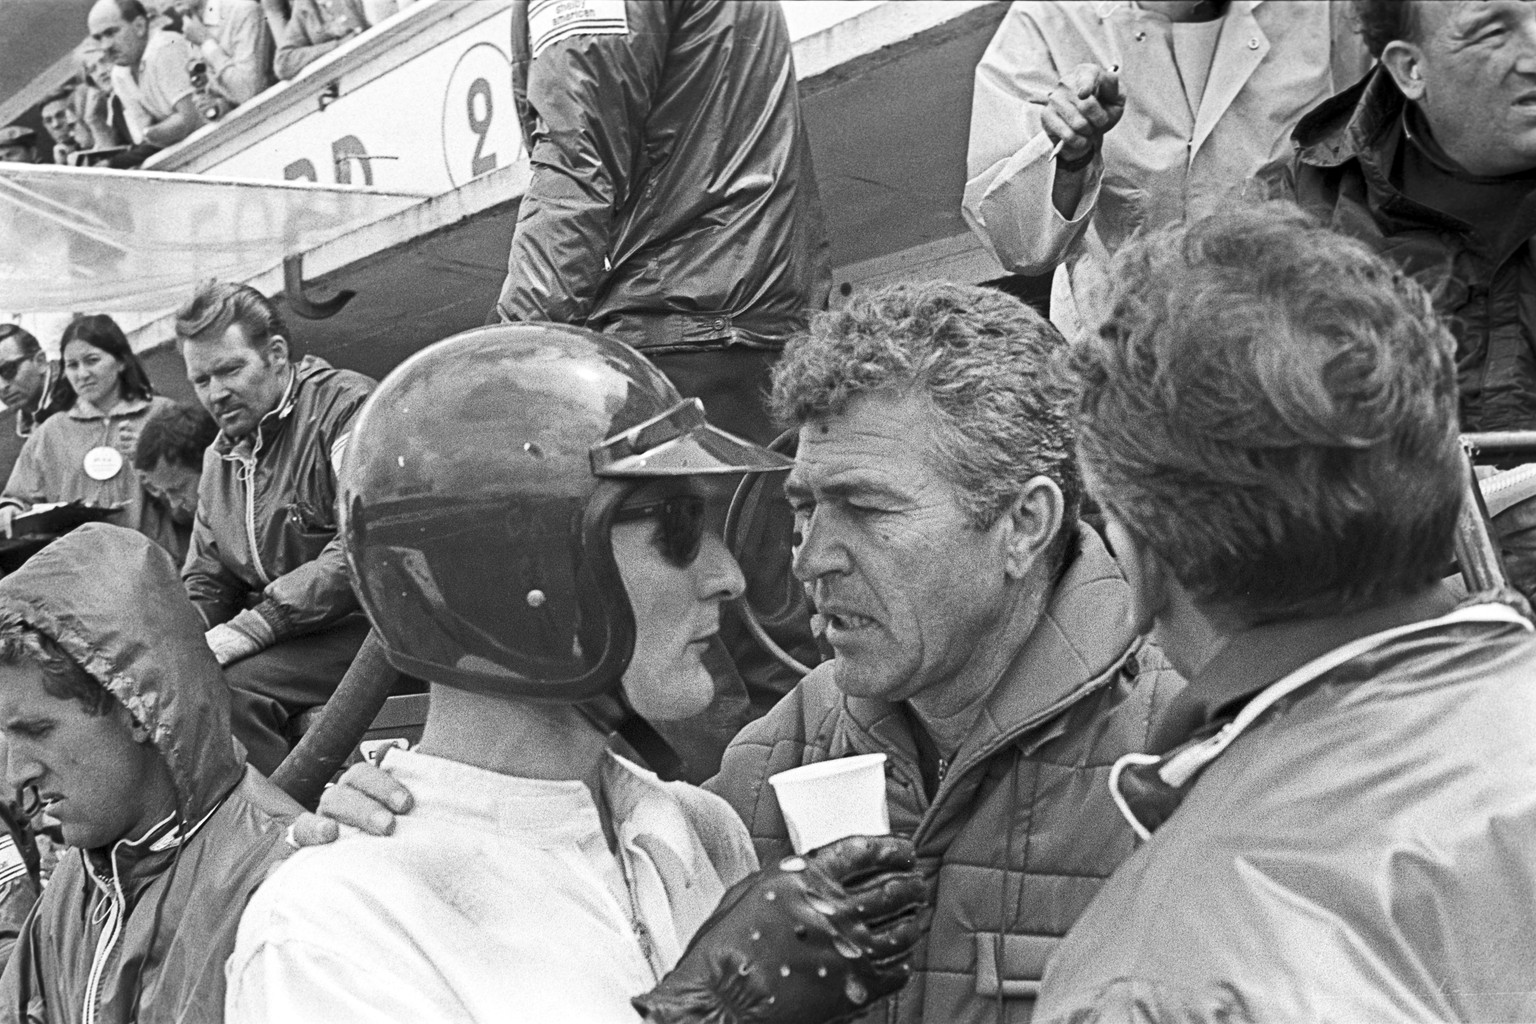 Ken Miles, Carroll Shelby, 24 Hours of Le Mans, Le Mans, 19 June 1966. Ken Miles with Carroll Shelby during the 1966 24 Hours of Le Mans. (Photo by Bernard Cahier/Getty Images)